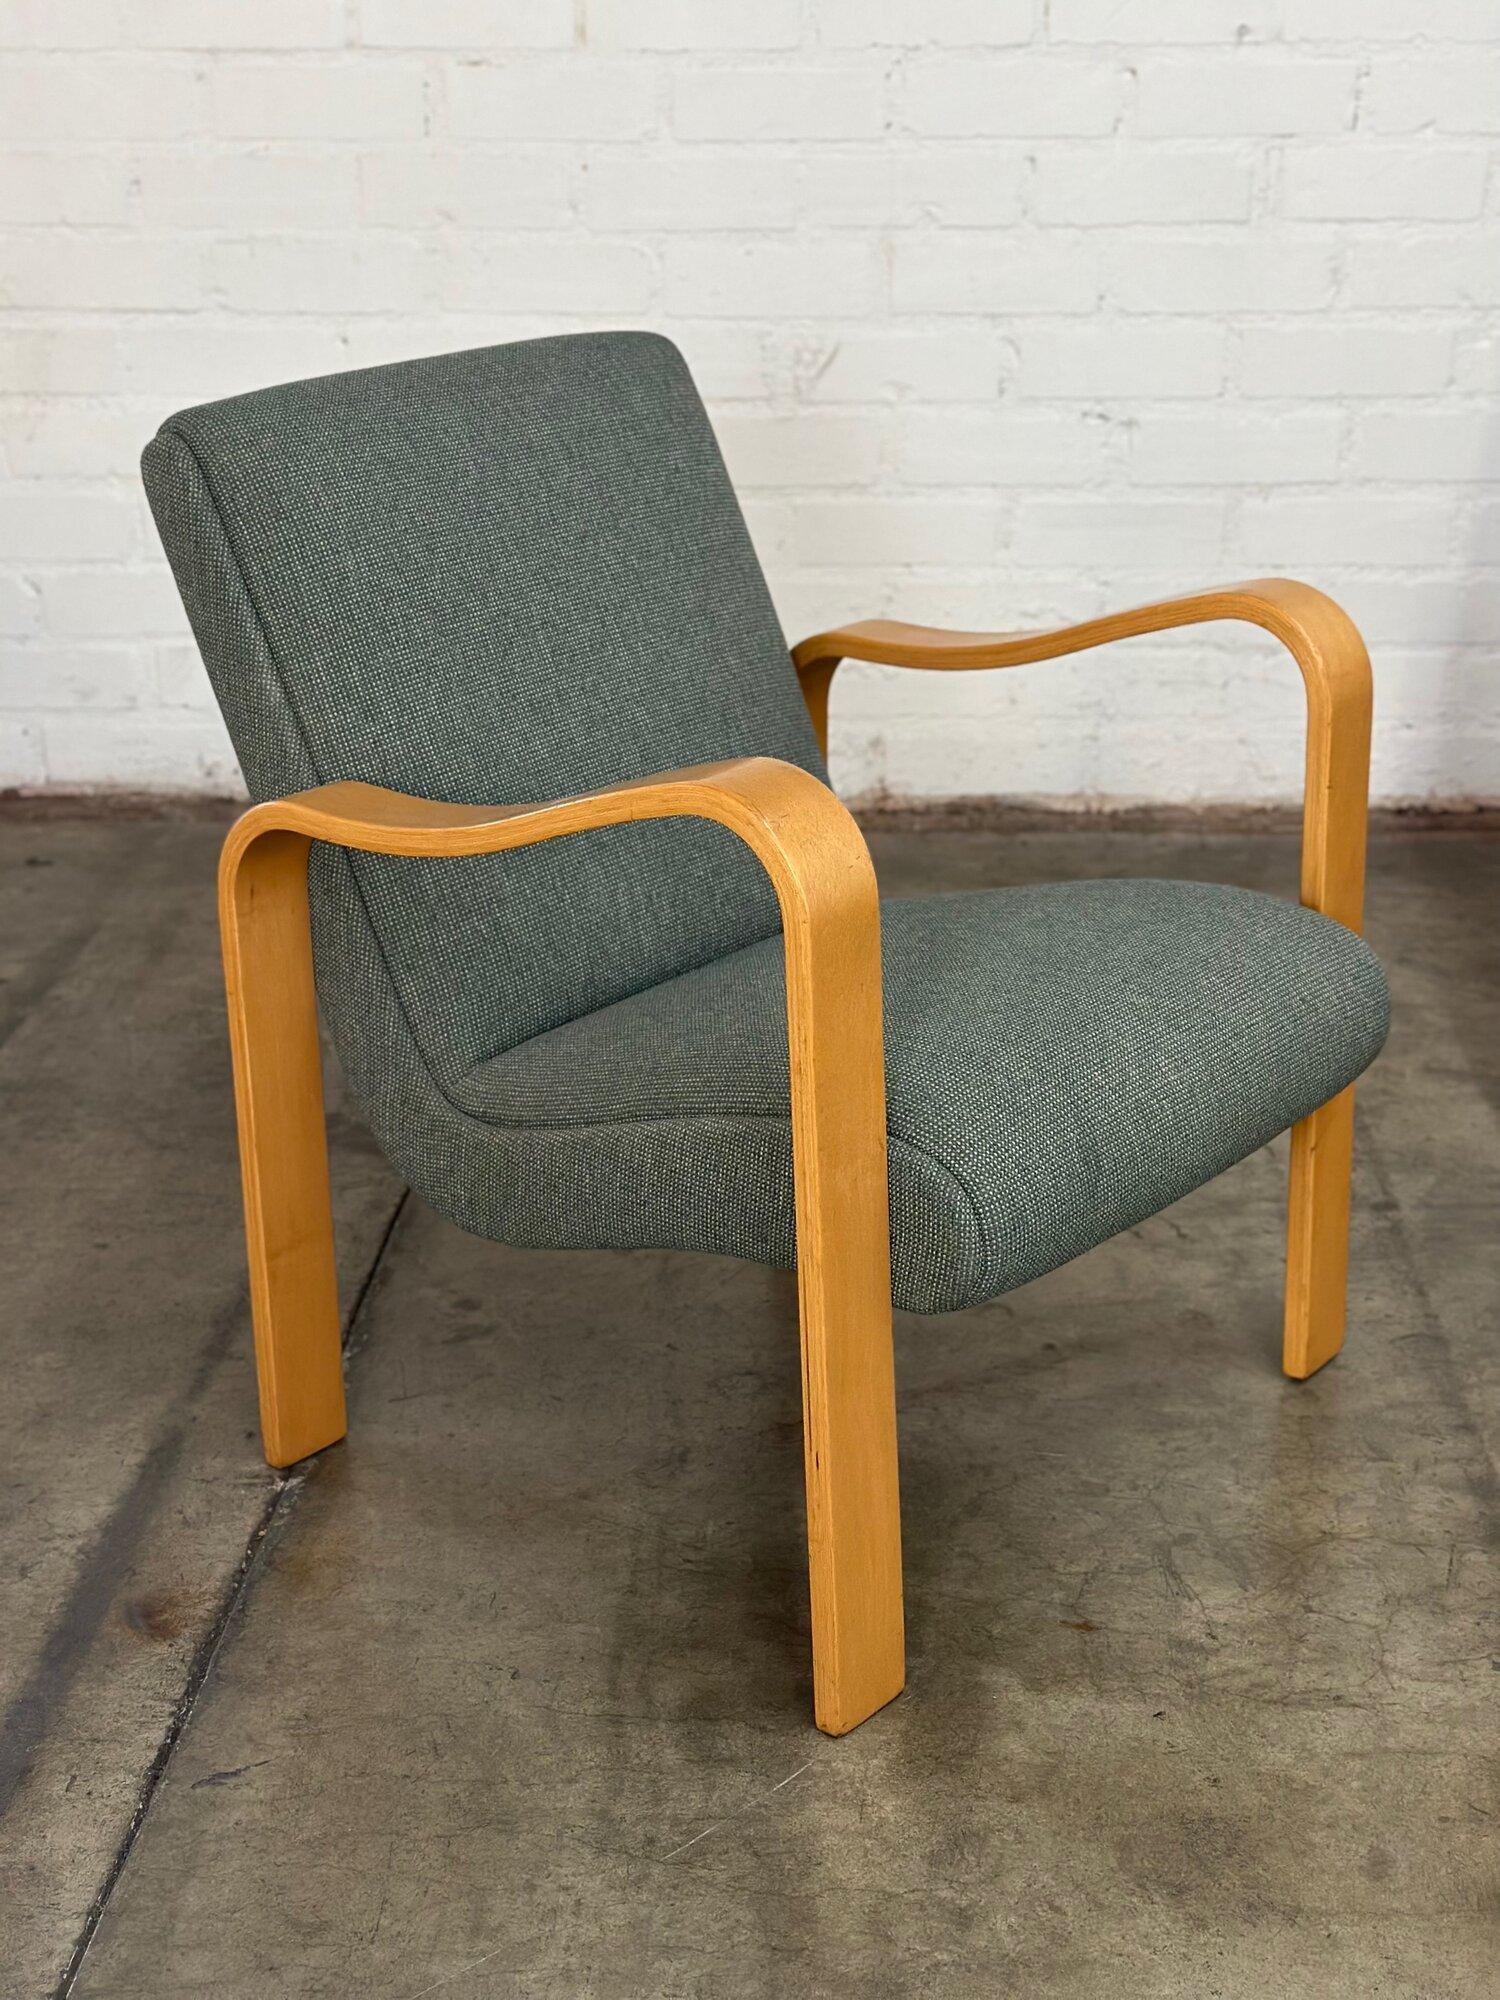 Mid-20th Century Maple Bent Wood Thonet Style Lounge Chair - Sold individually